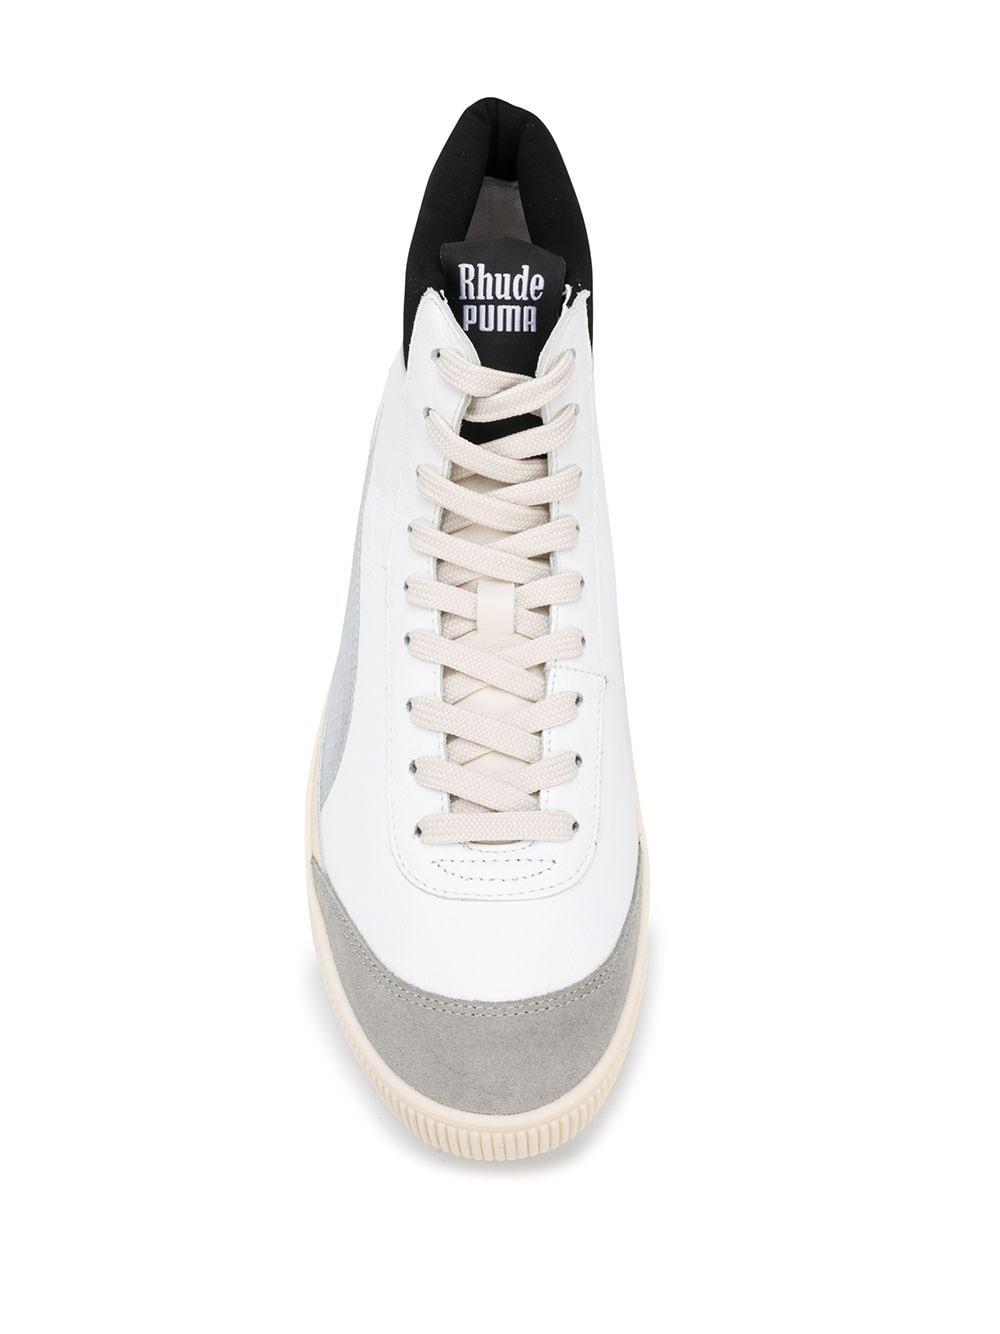 PUMA Leather X Rhude Basket '68 Og Mid Sneakers in White for 